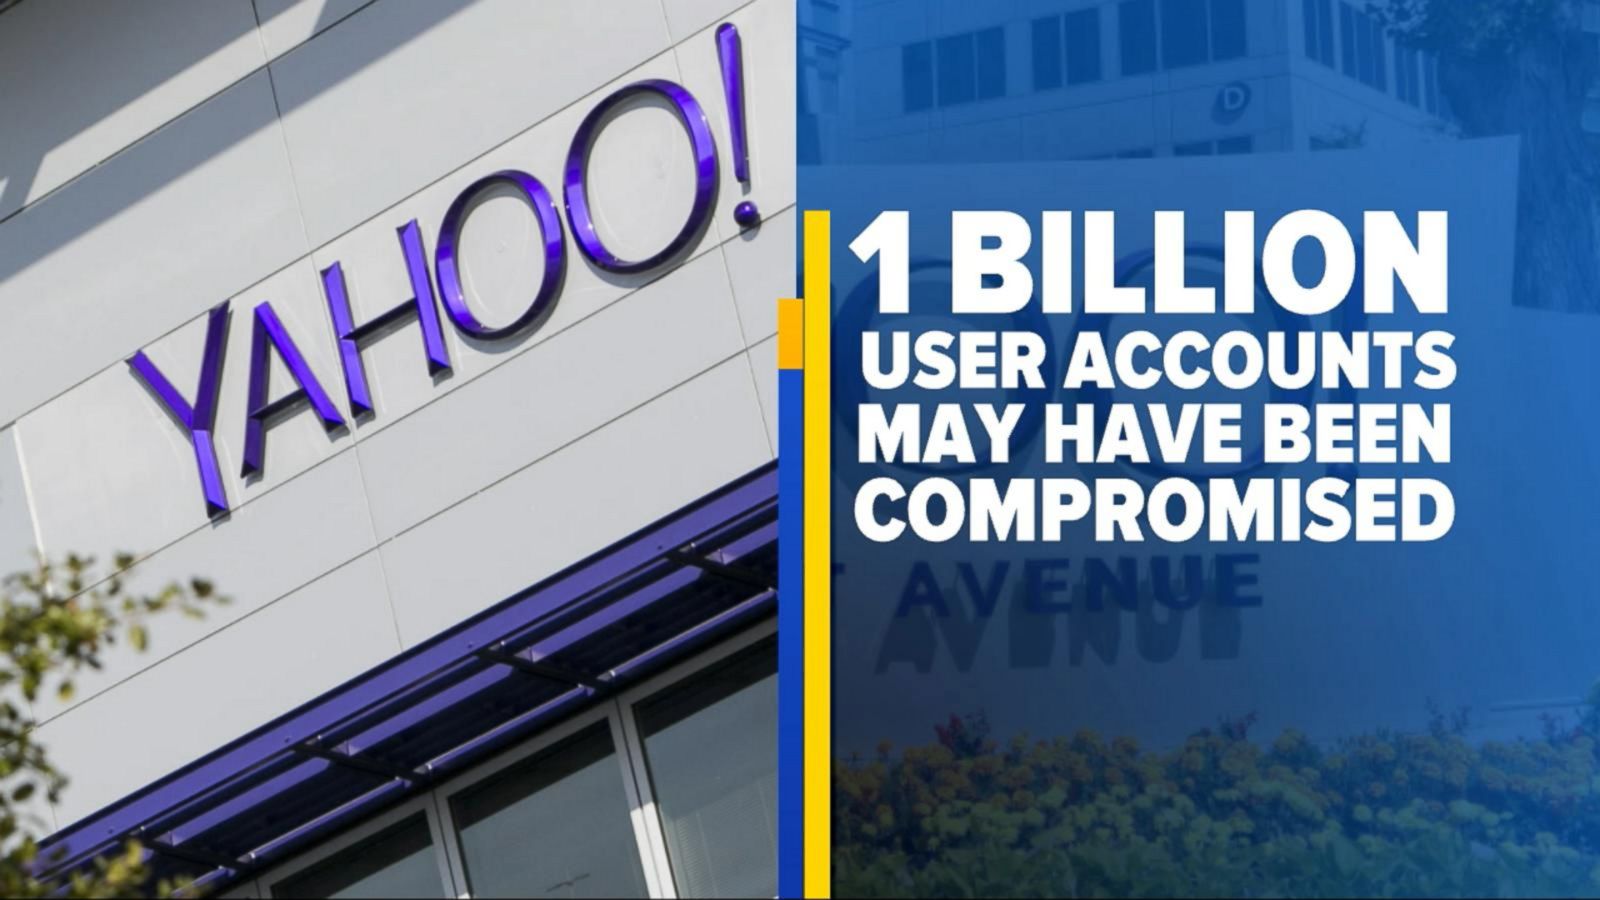 3 Things to Consider After the Latest Yahoo Breach ABC News